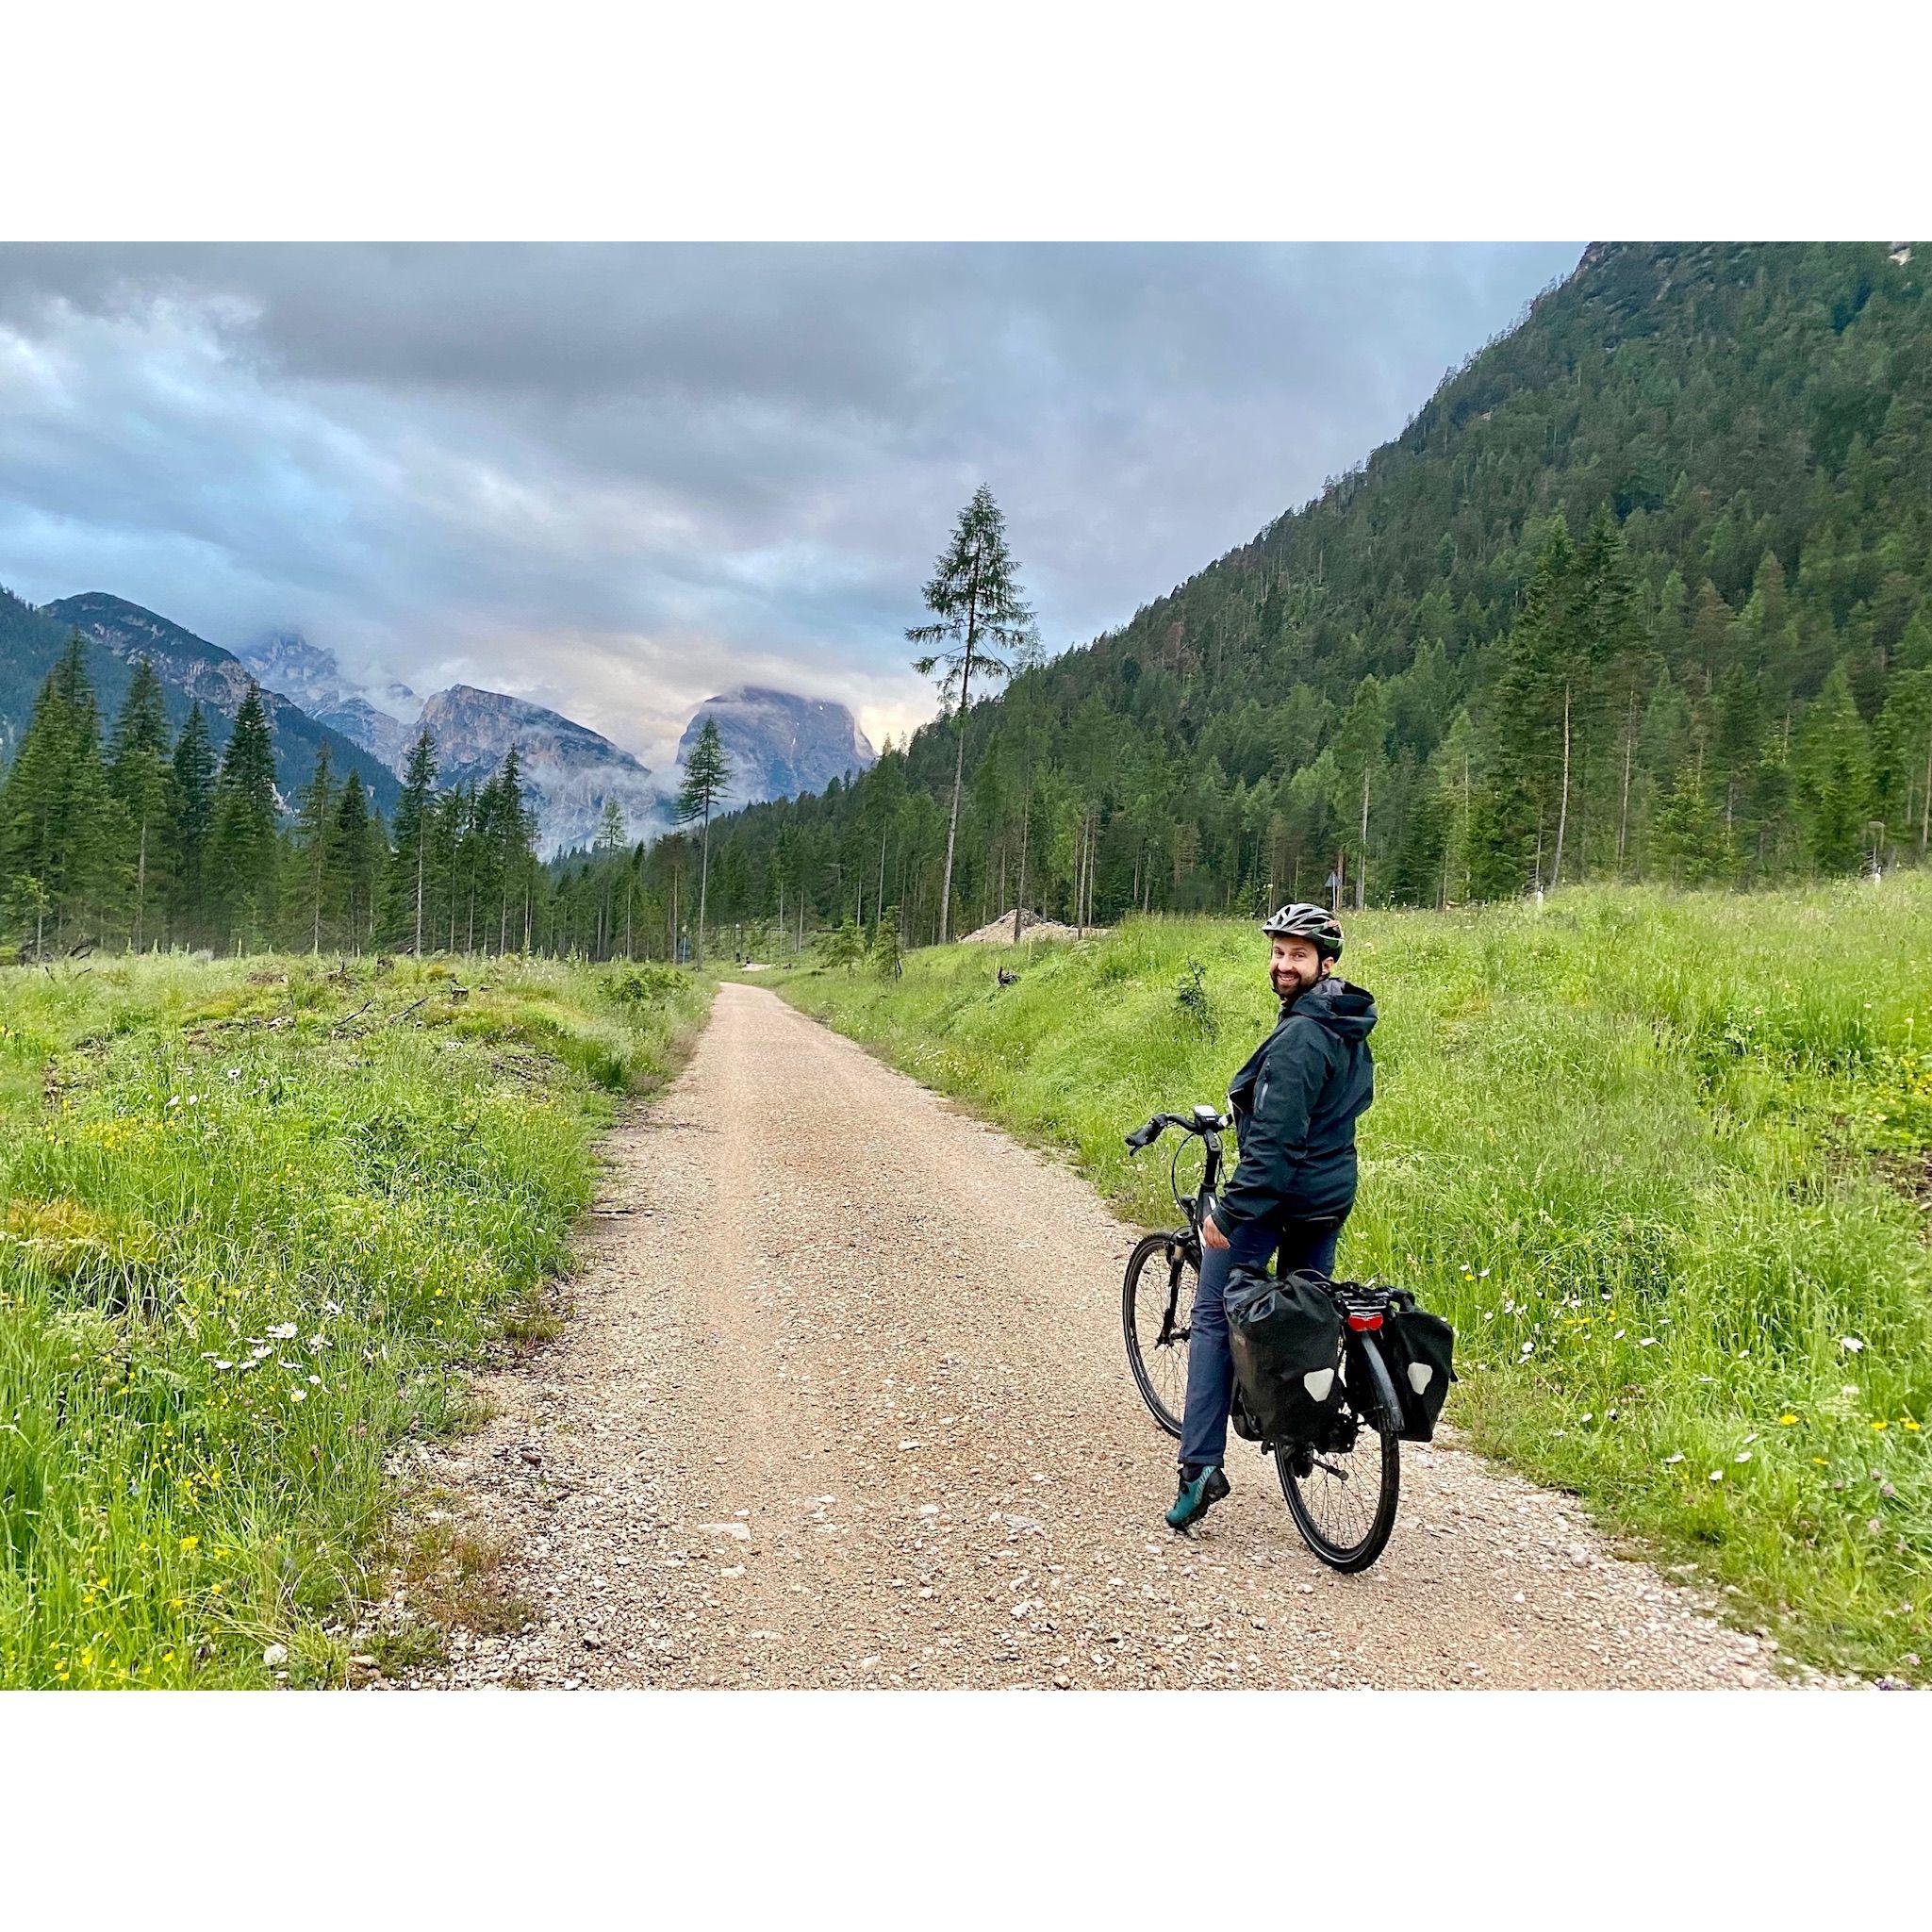 A magical conclusion to our bike trip: we coasted into Cortina de Ampezzo as dusk and mist settled in, surrounded by the mountains. August, 2021